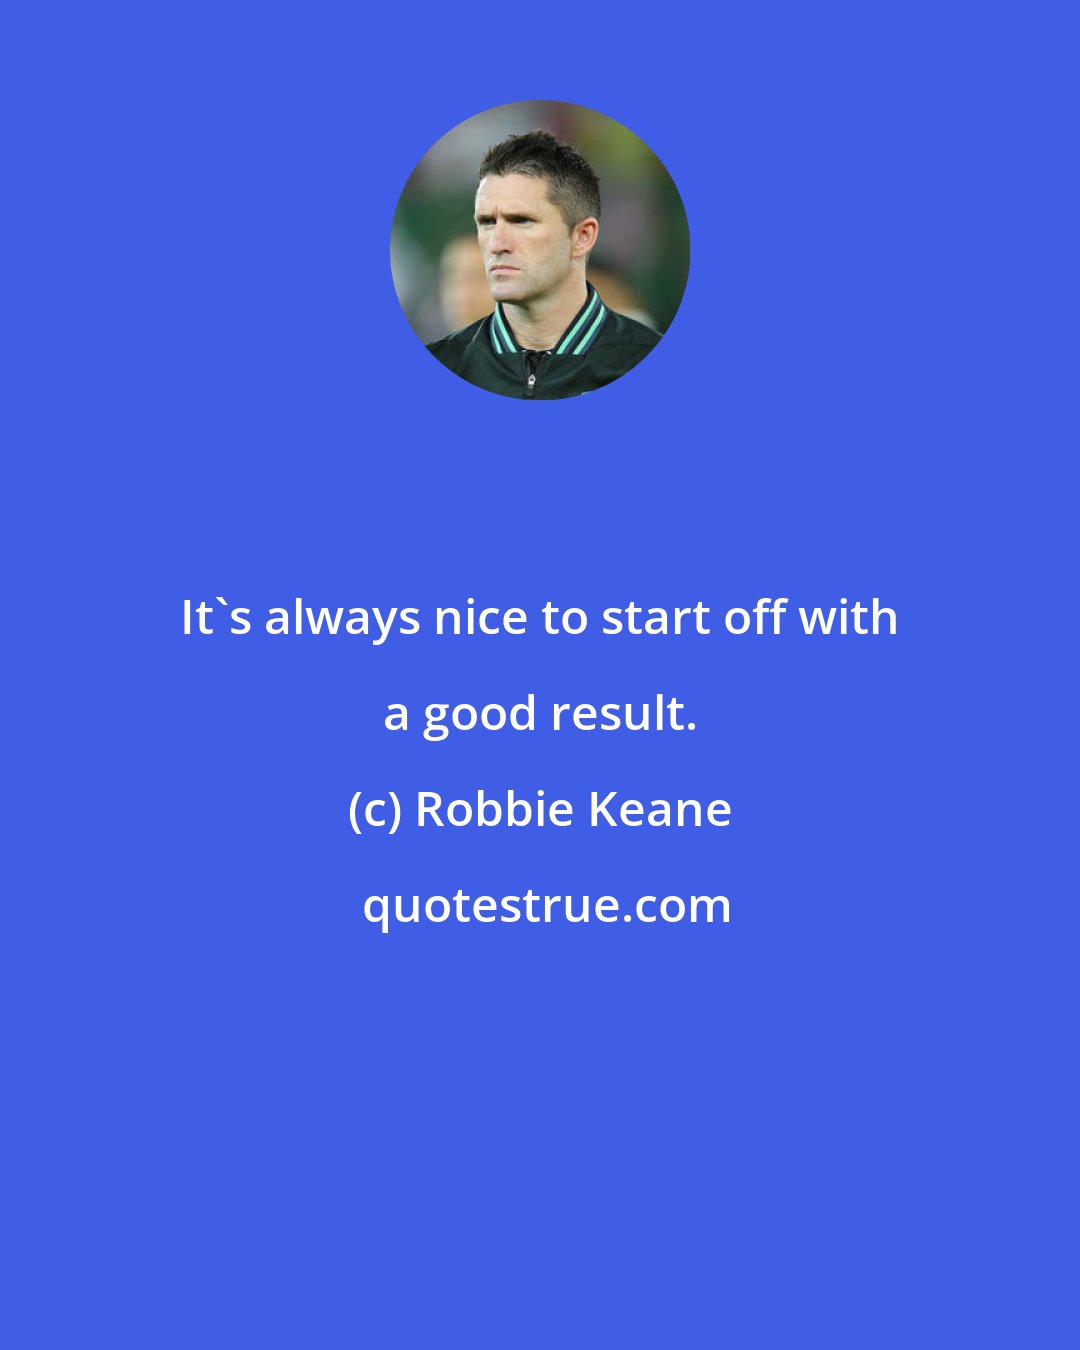 Robbie Keane: It's always nice to start off with a good result.